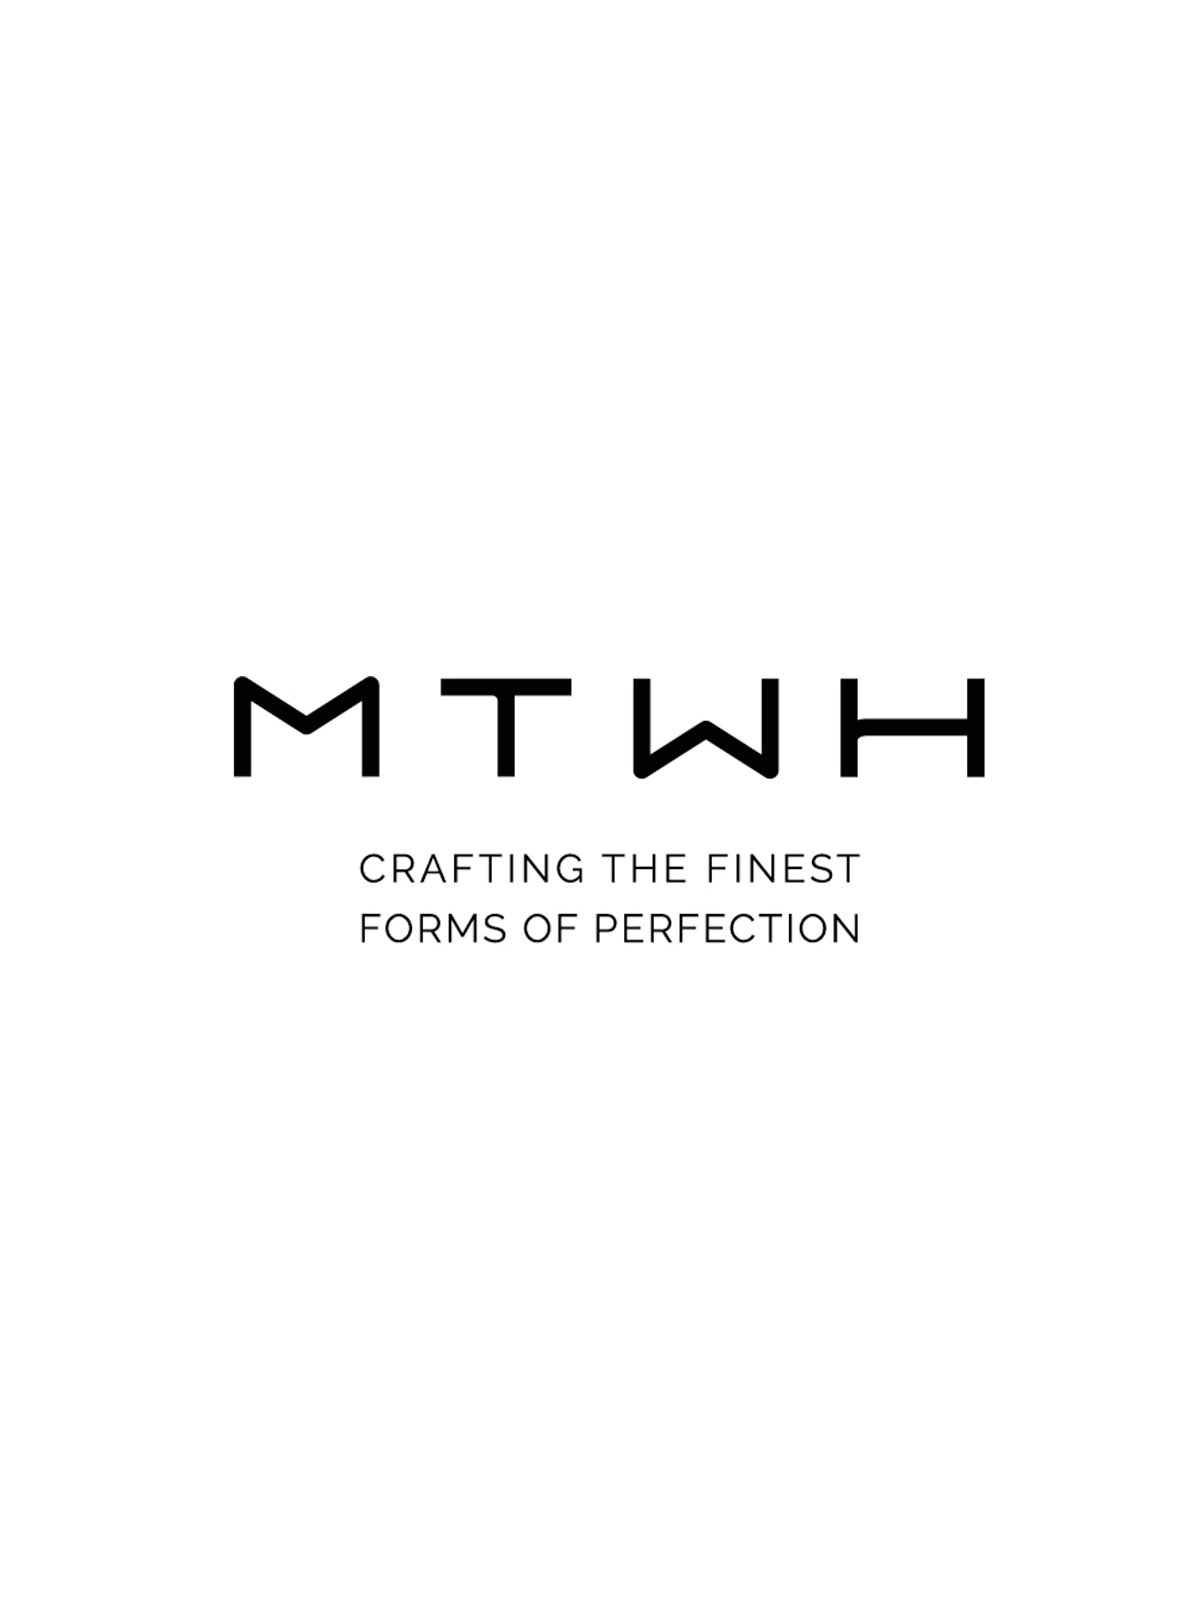 MTWH is strengthened with the acquisition of the Metalstudio Group